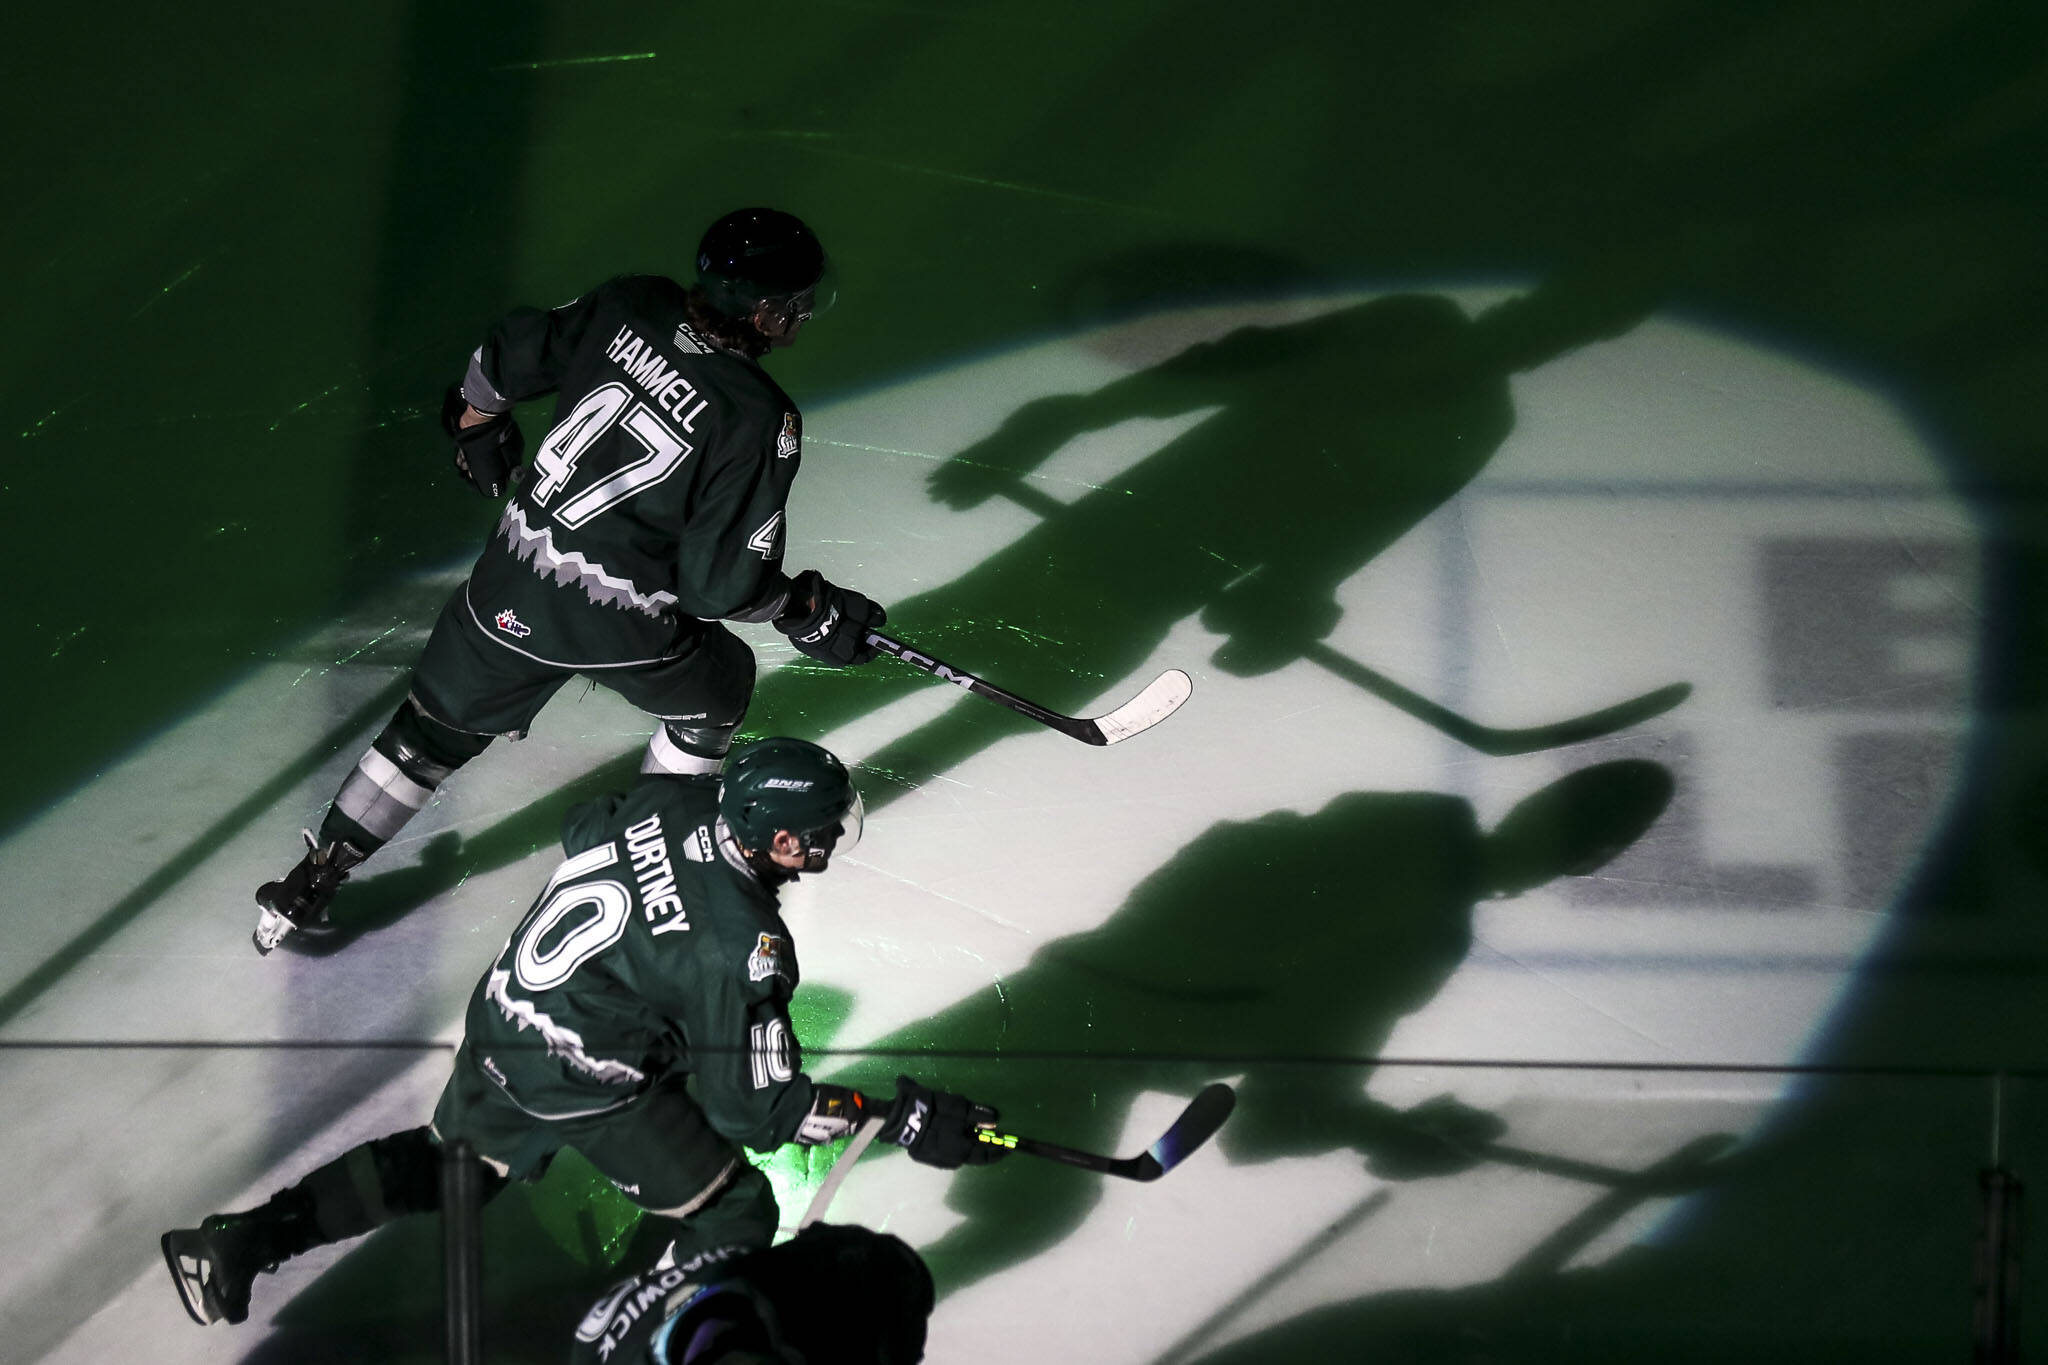 Silvertips’ Kaden Hammell (47) enters the rink during a game against the Tri-City Americans at the Angel of the Winds Arena on Sunday in Everett. (Annie Barker / The Herald)